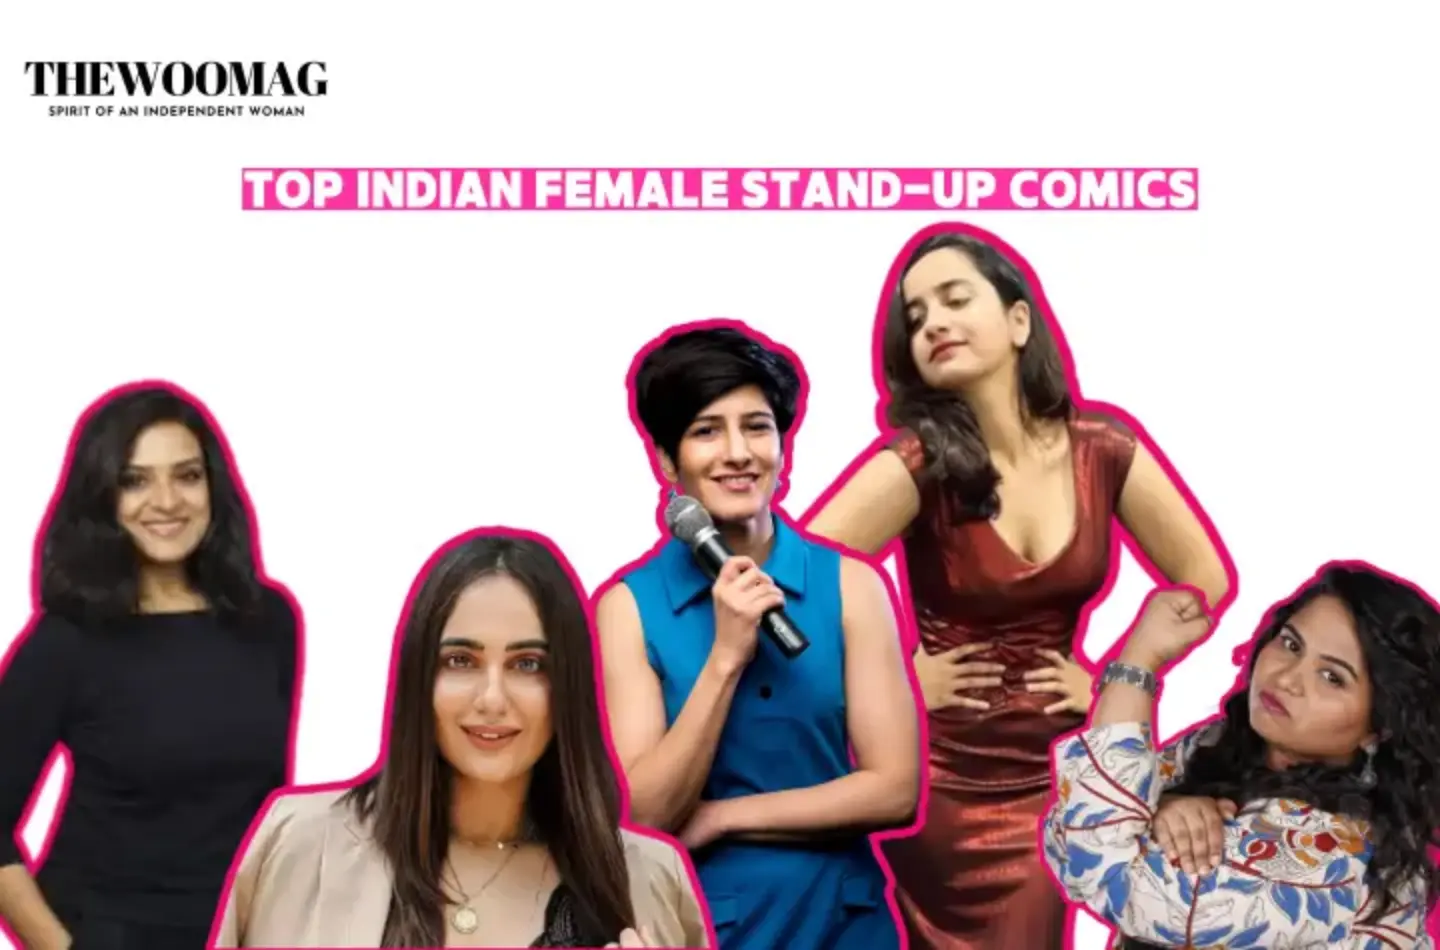 Top 10 Female Stand-Up Indian Comedians